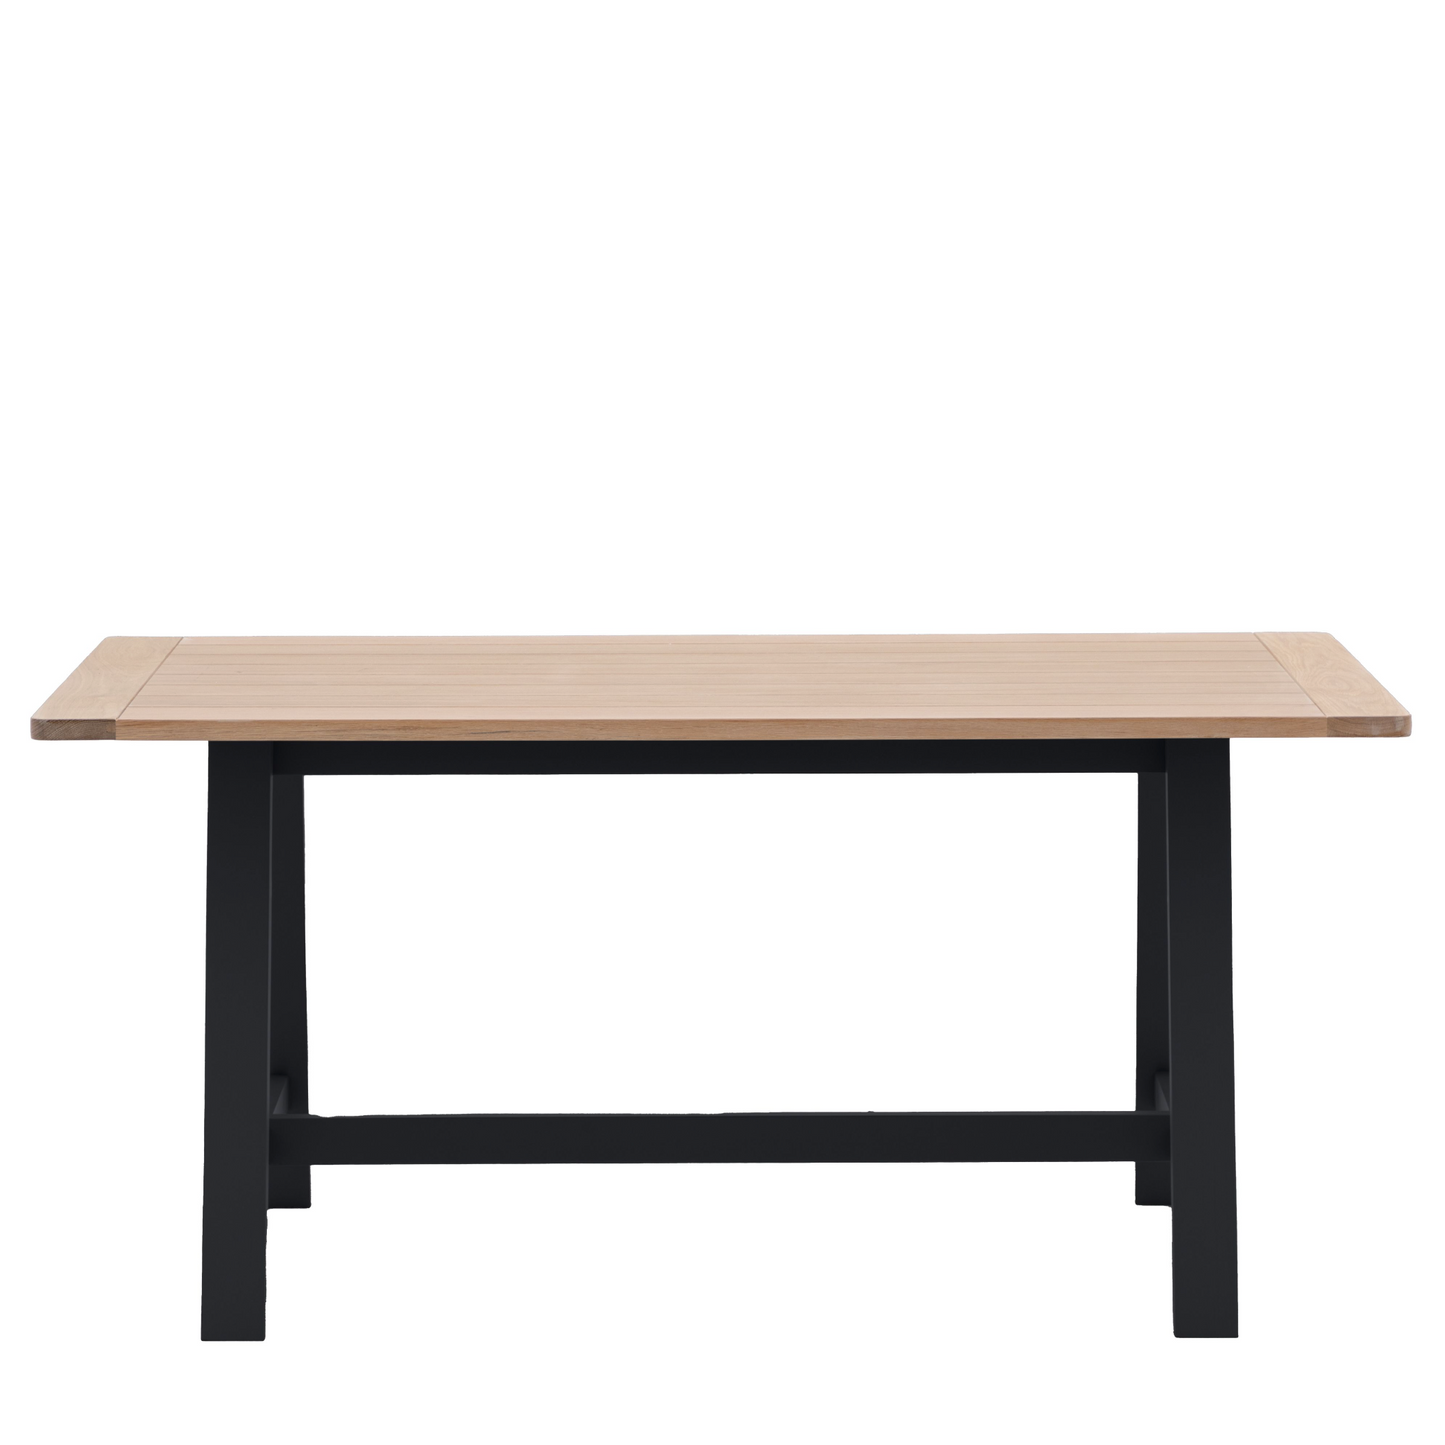 A Buckland Trestle Table 1600x800x750 in Meteor with black legs for interior decor.